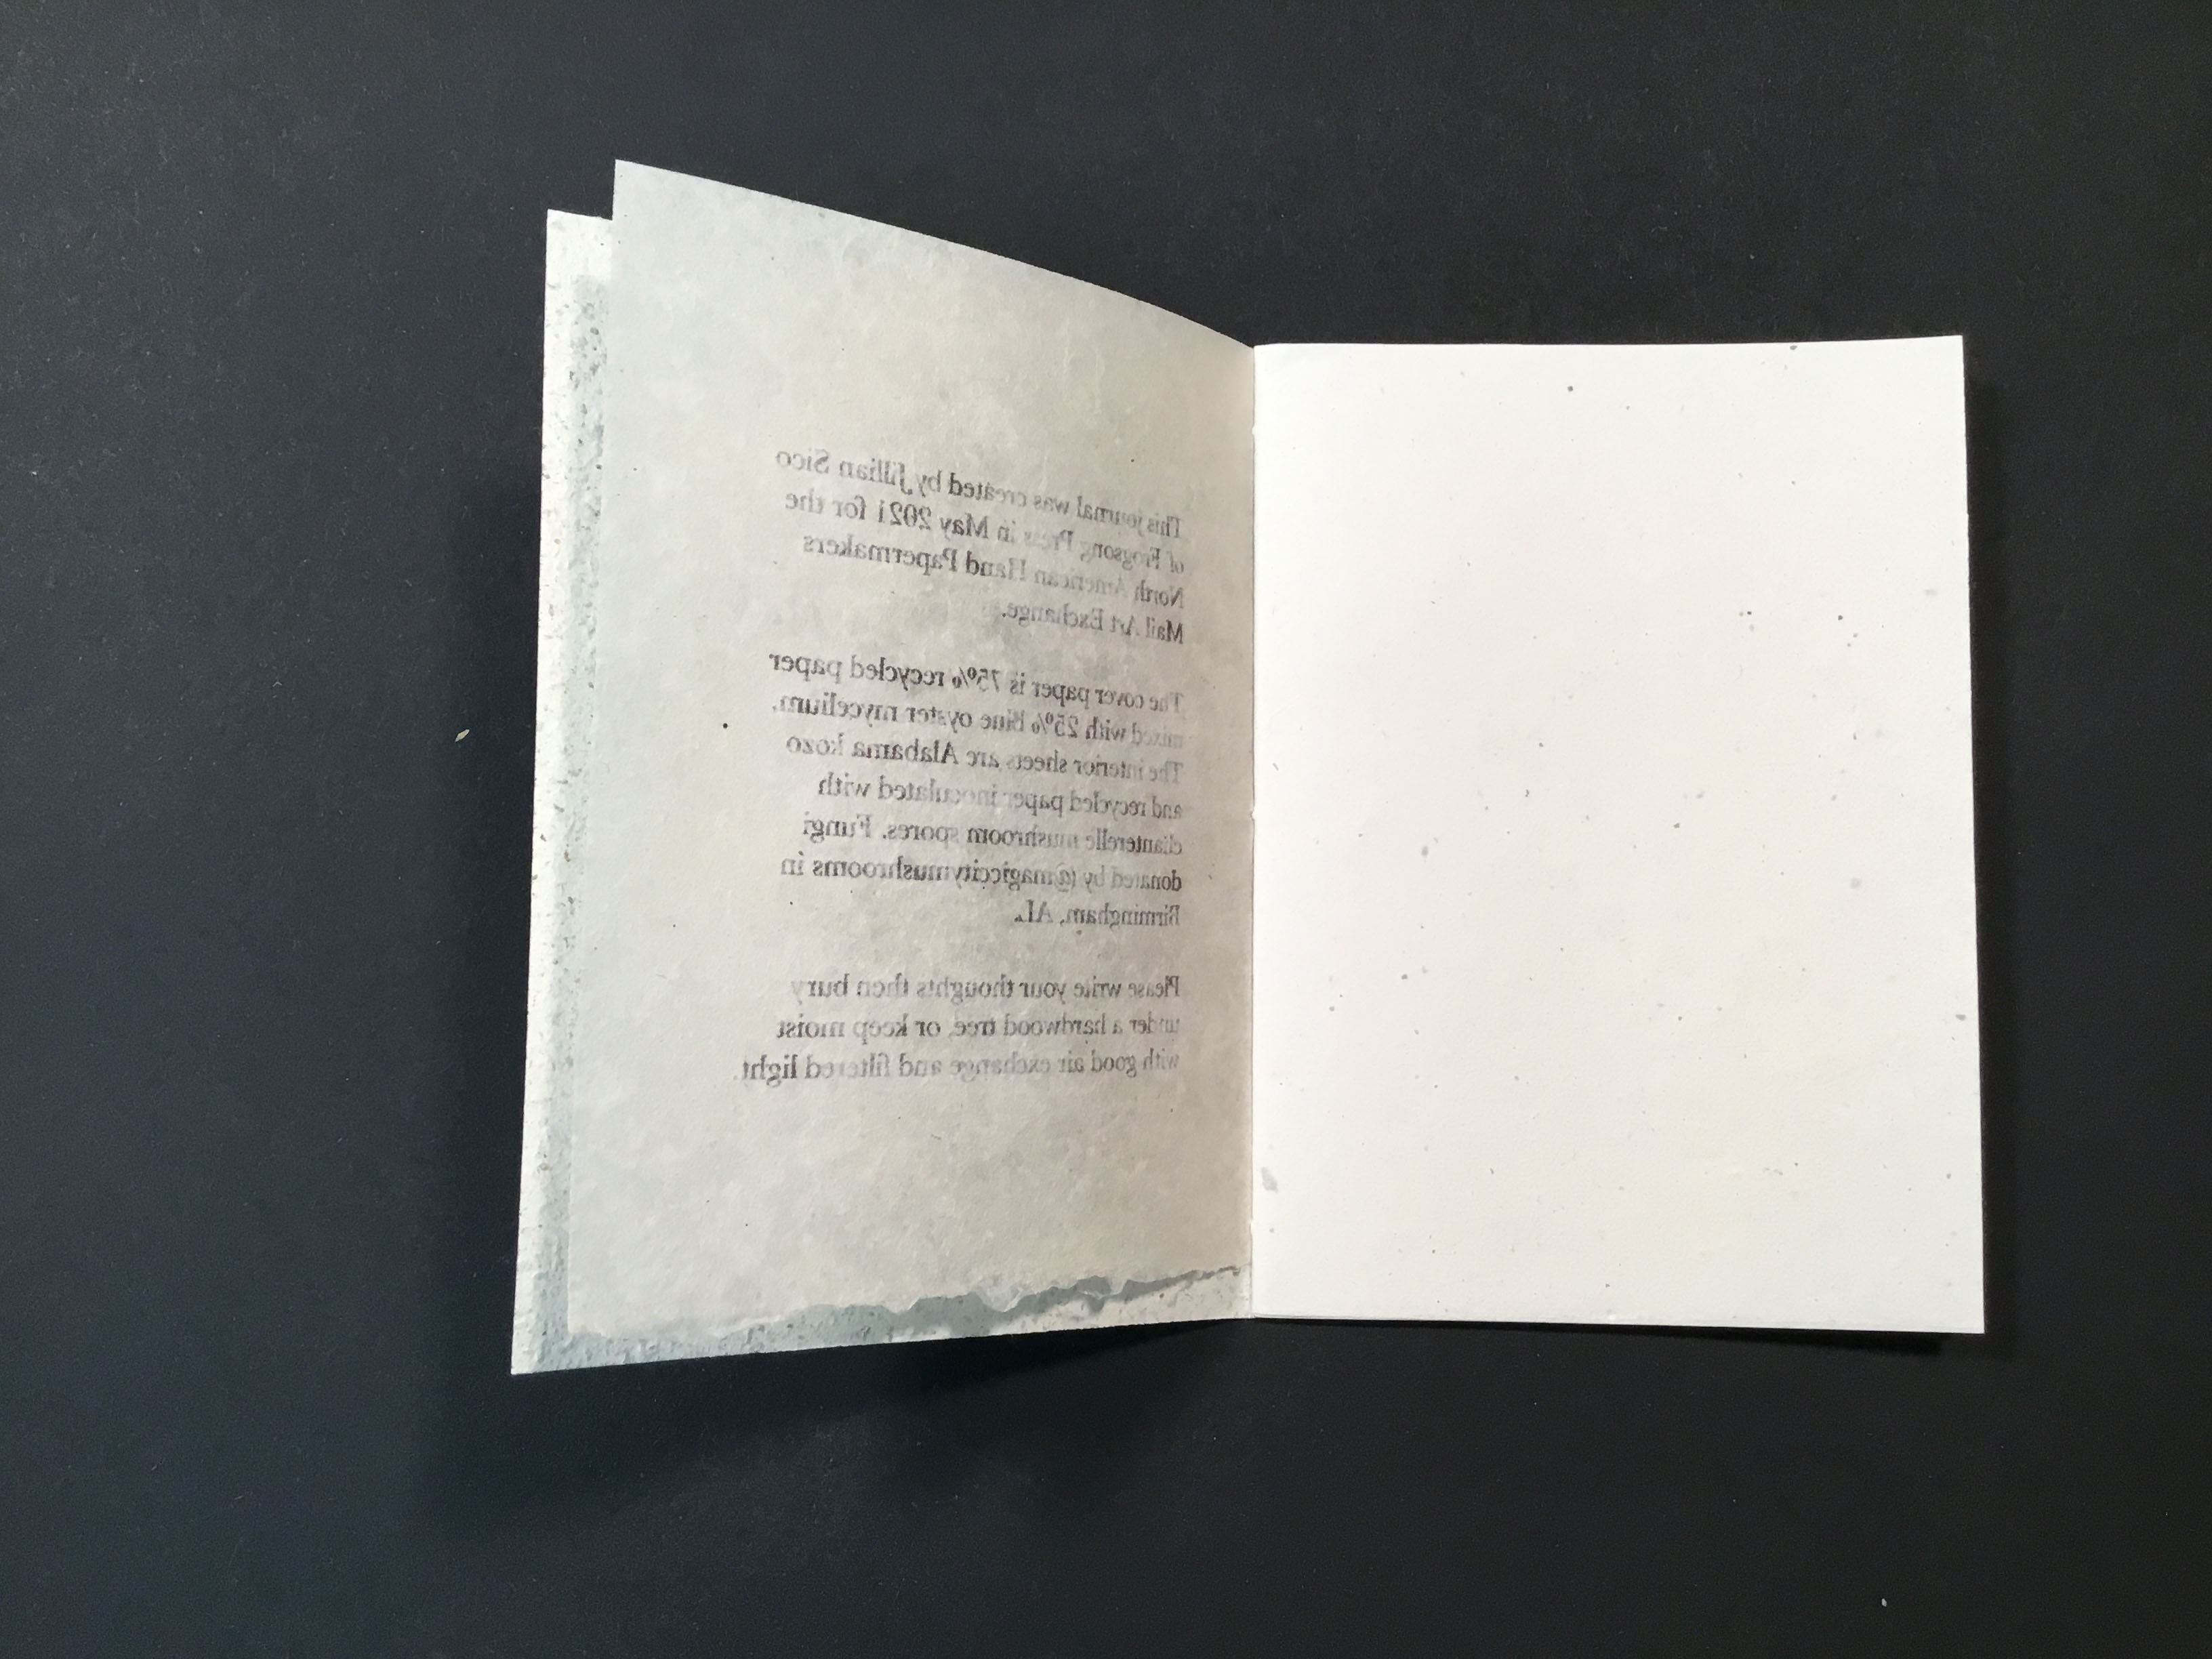 A journal with beige covers made of recycled paper and blue oyster mycelium scattered throughout, resembling a sedimentary rock. The cover has a root inclusion in the center, and the interior pages are off-white and are made from Alabama kozo and recycled paper with chanterelle mushroom spores.